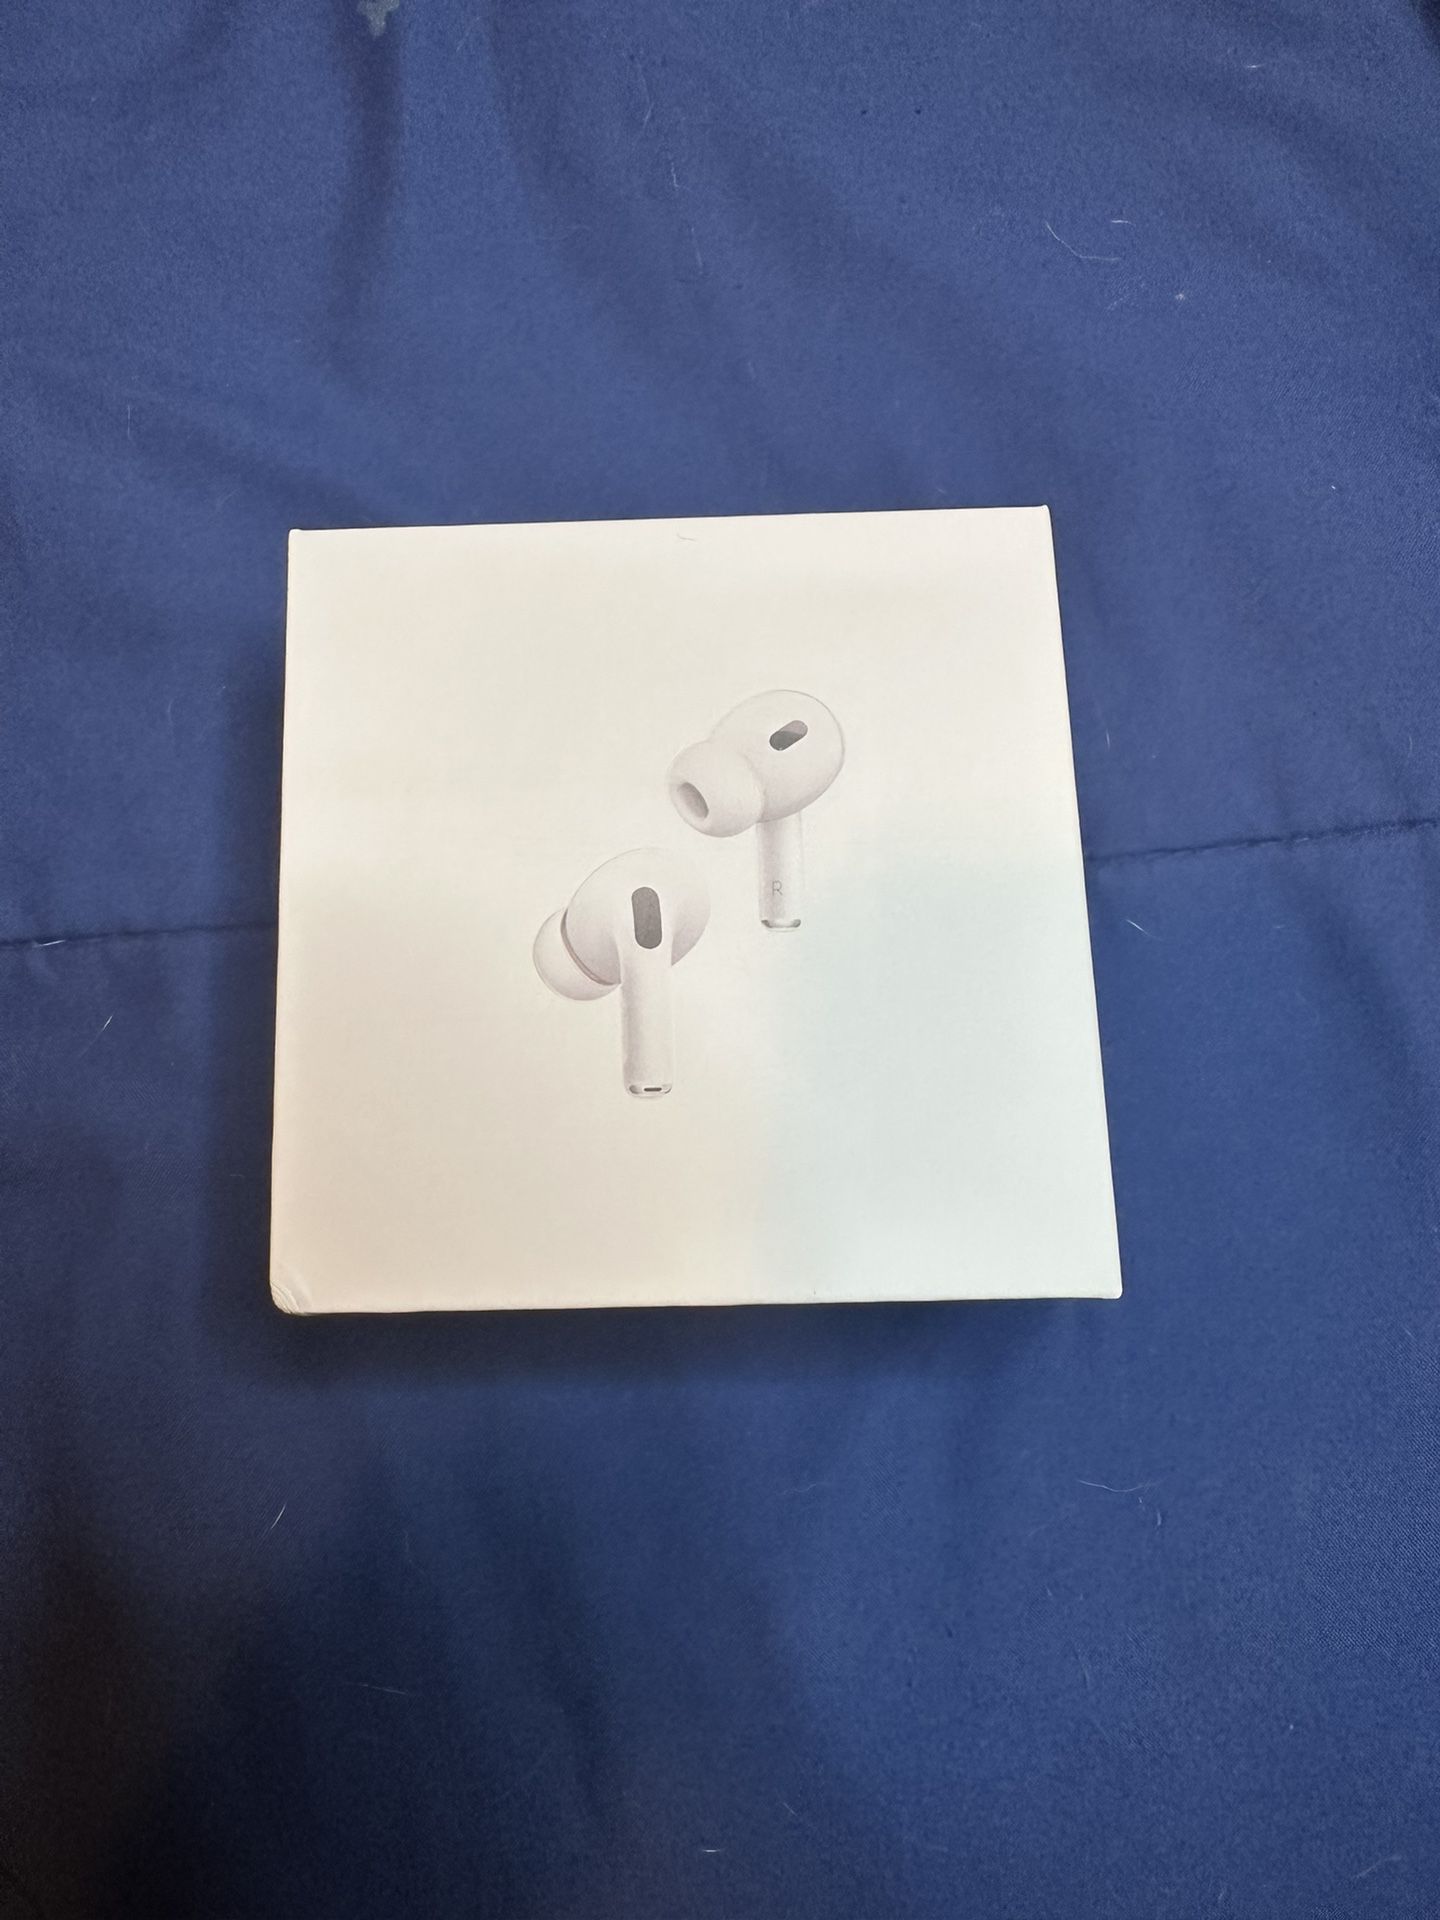 Apple AirPods Pro Gen 2 With MagSafe Charging Case